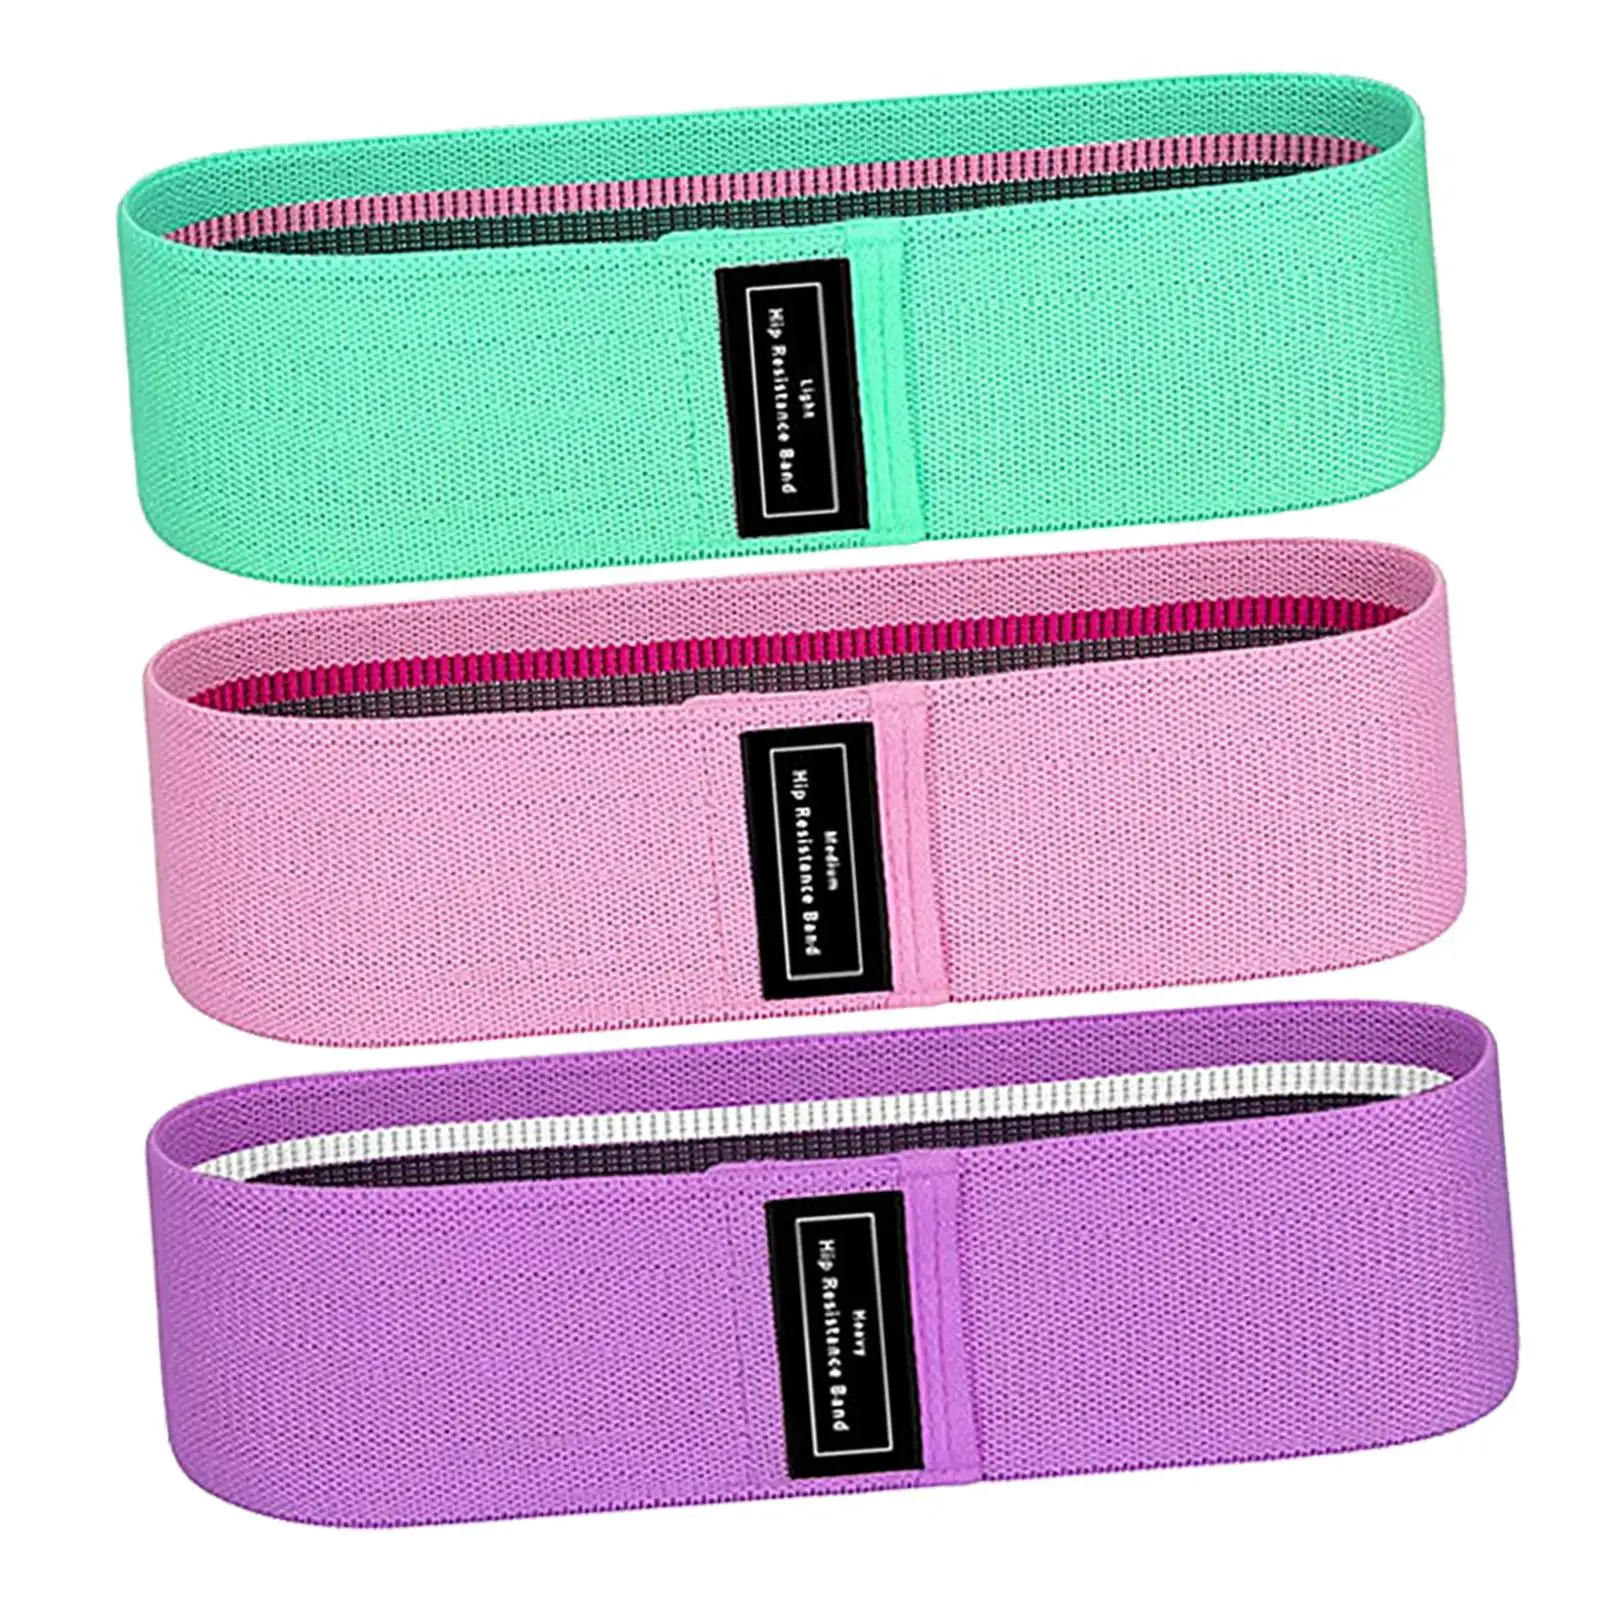 Portable Resistance Band Exercise Non Slip Stretch Band Elastic Loop Band for